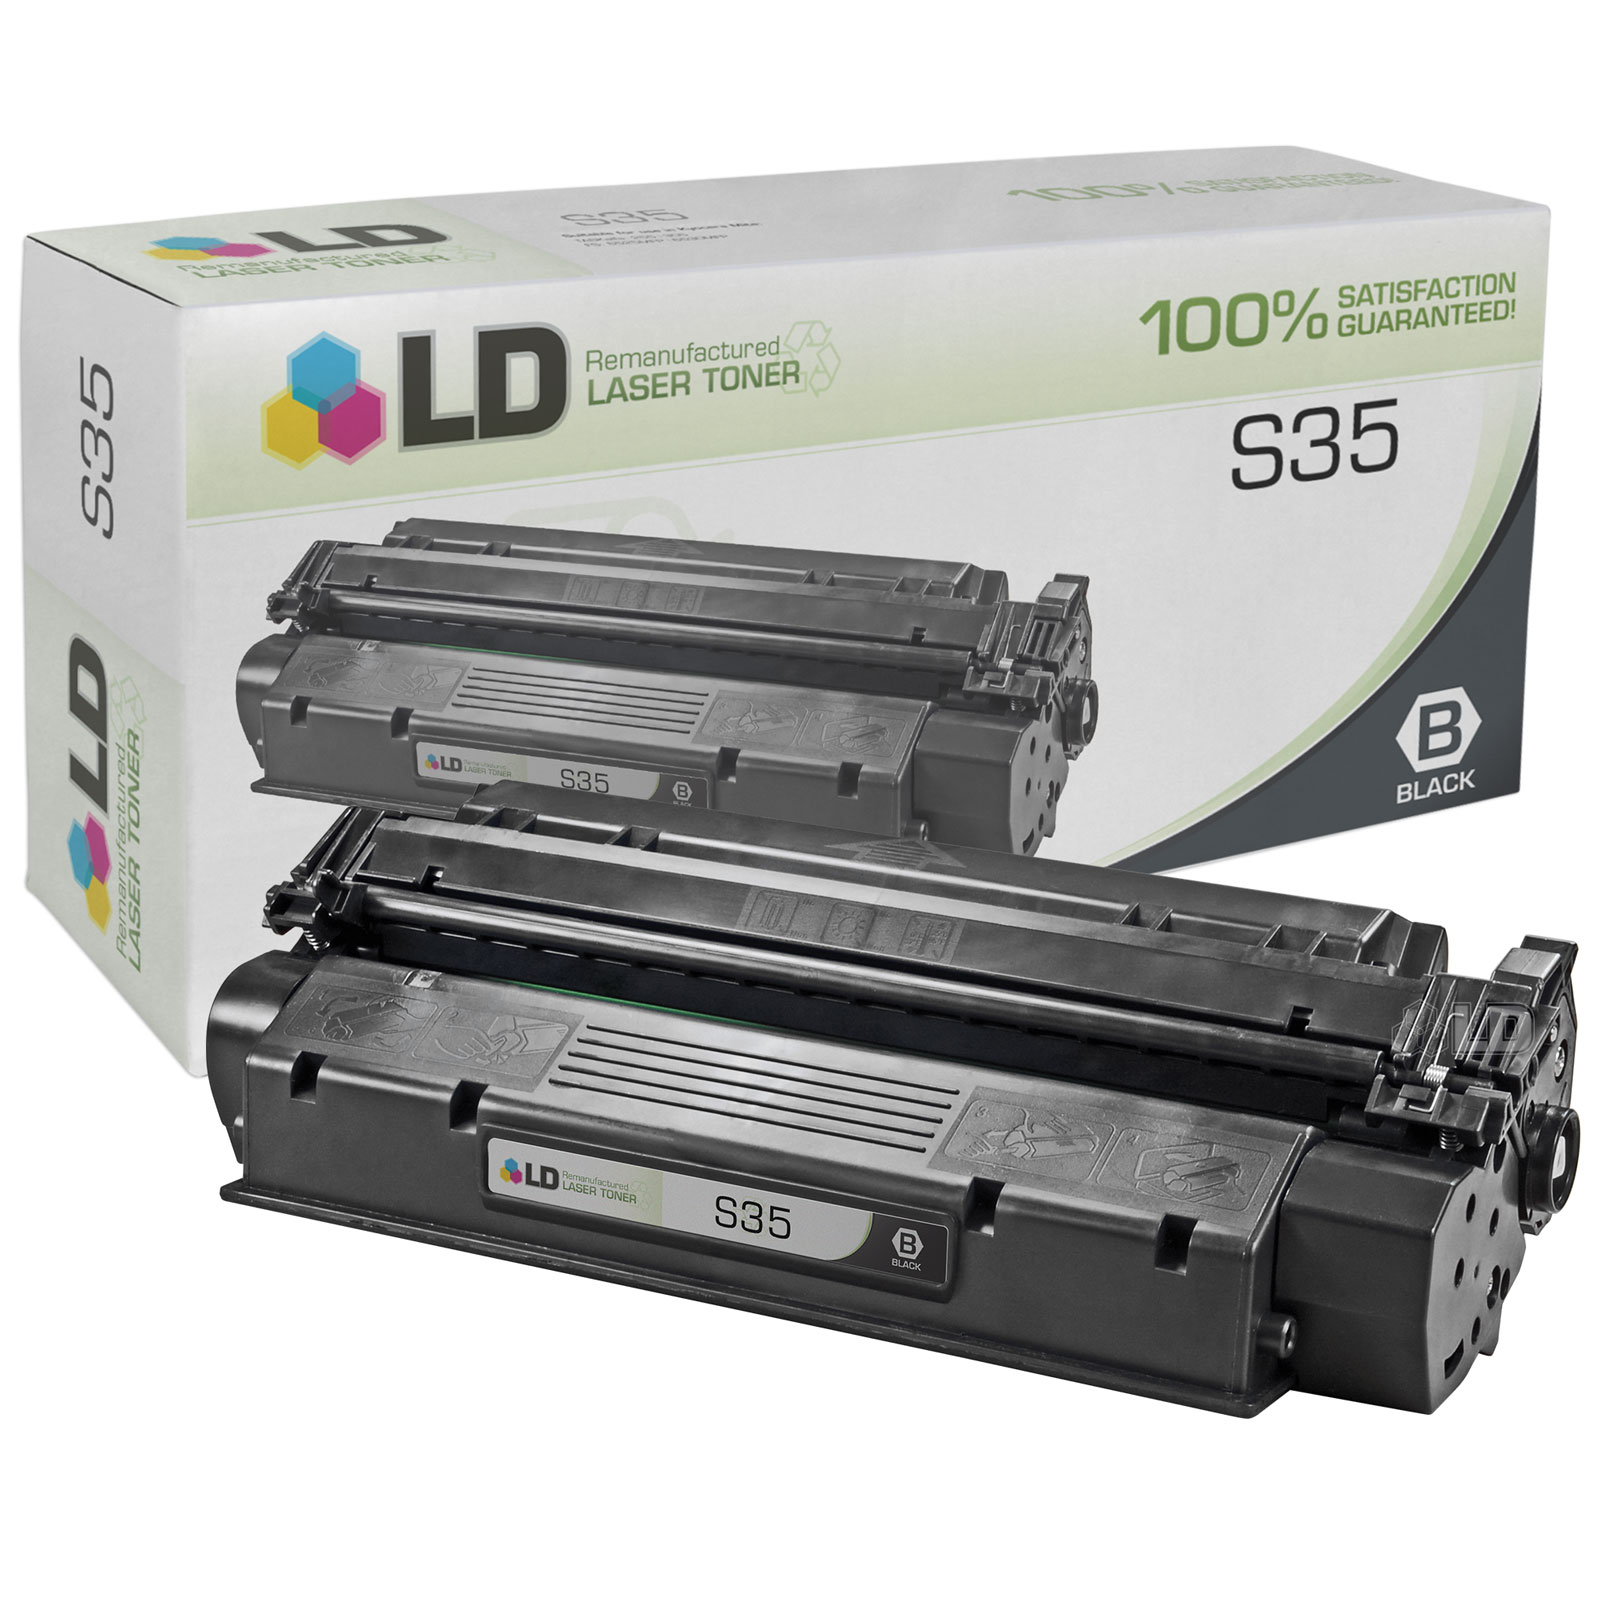 LD Remanufactured Black Laser Toner Cartridge for Canon 7833A001AA (S35) for use in the ICD-340, ImageClass D320, D340, D383 Printers - image 1 of 1